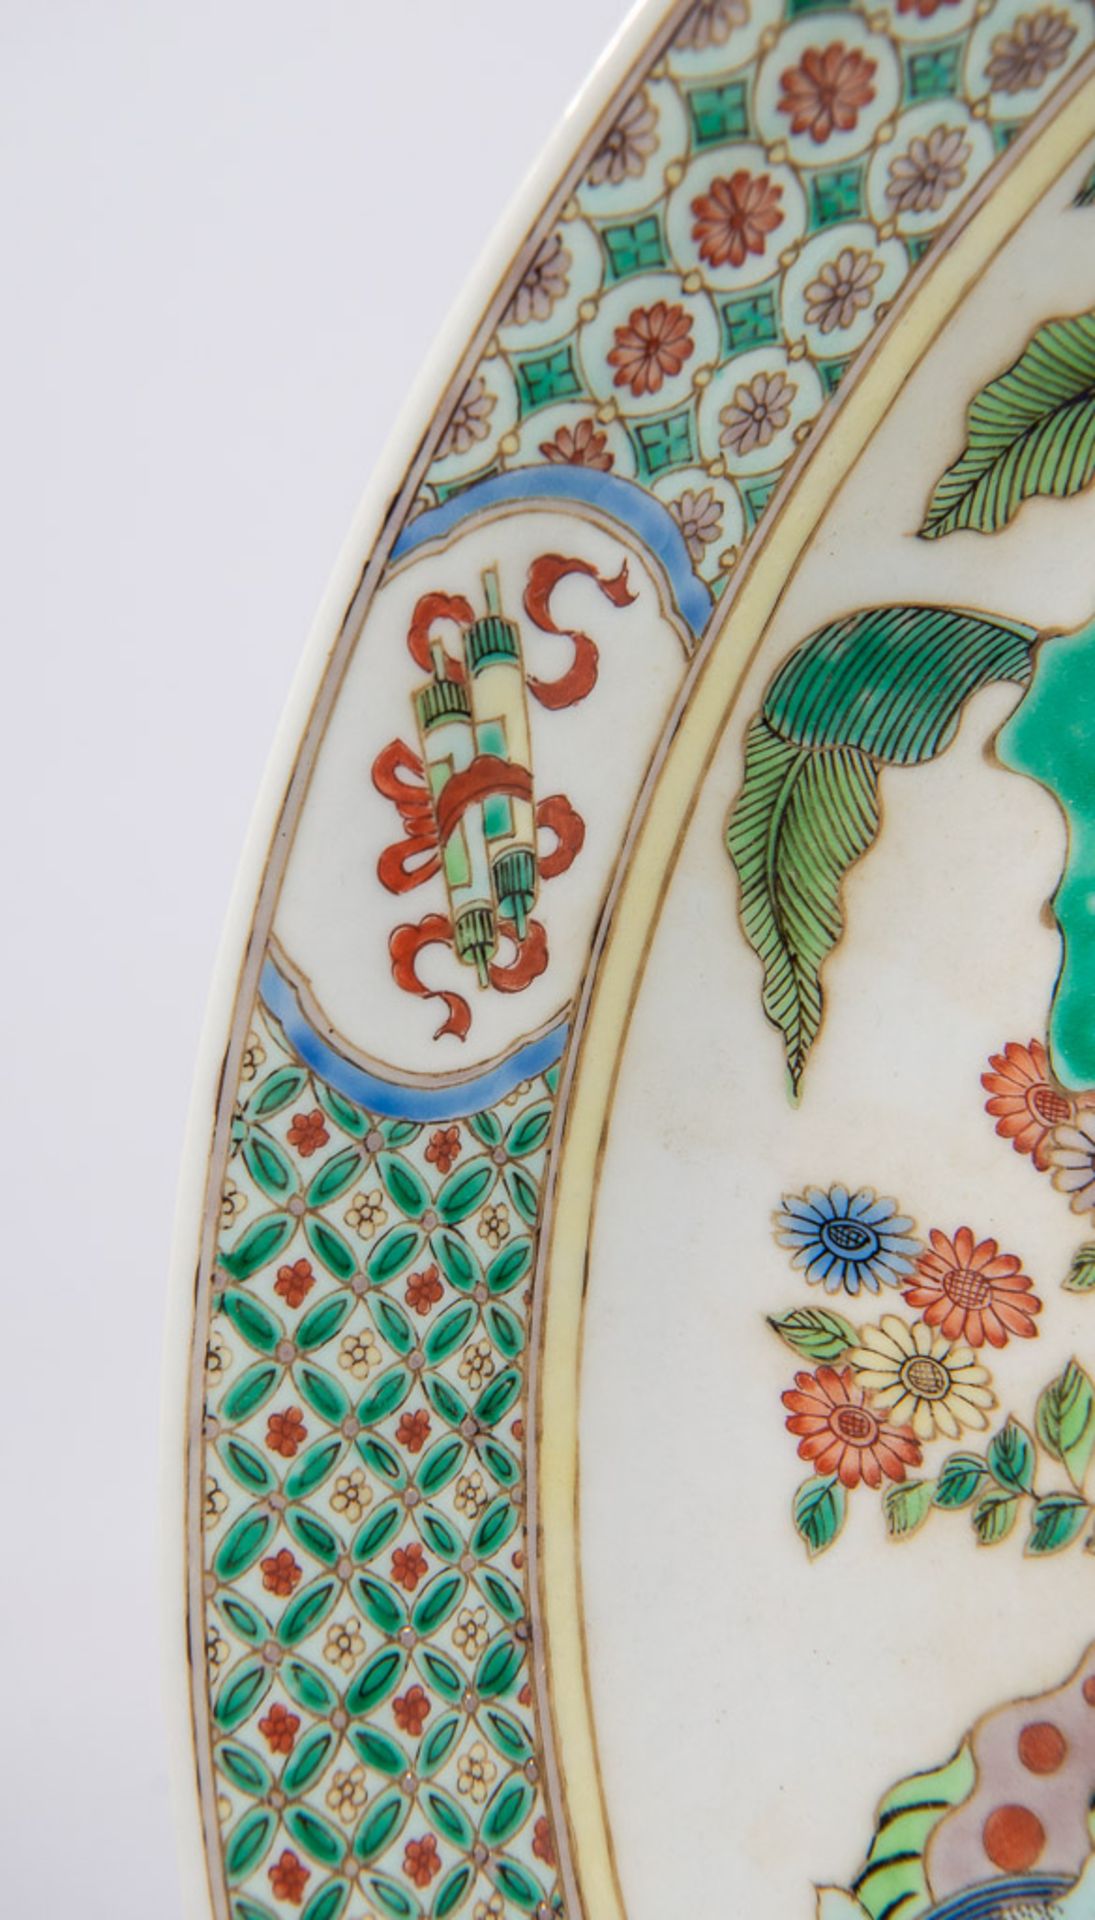 Display plate Wucai with dragons - Image 10 of 12